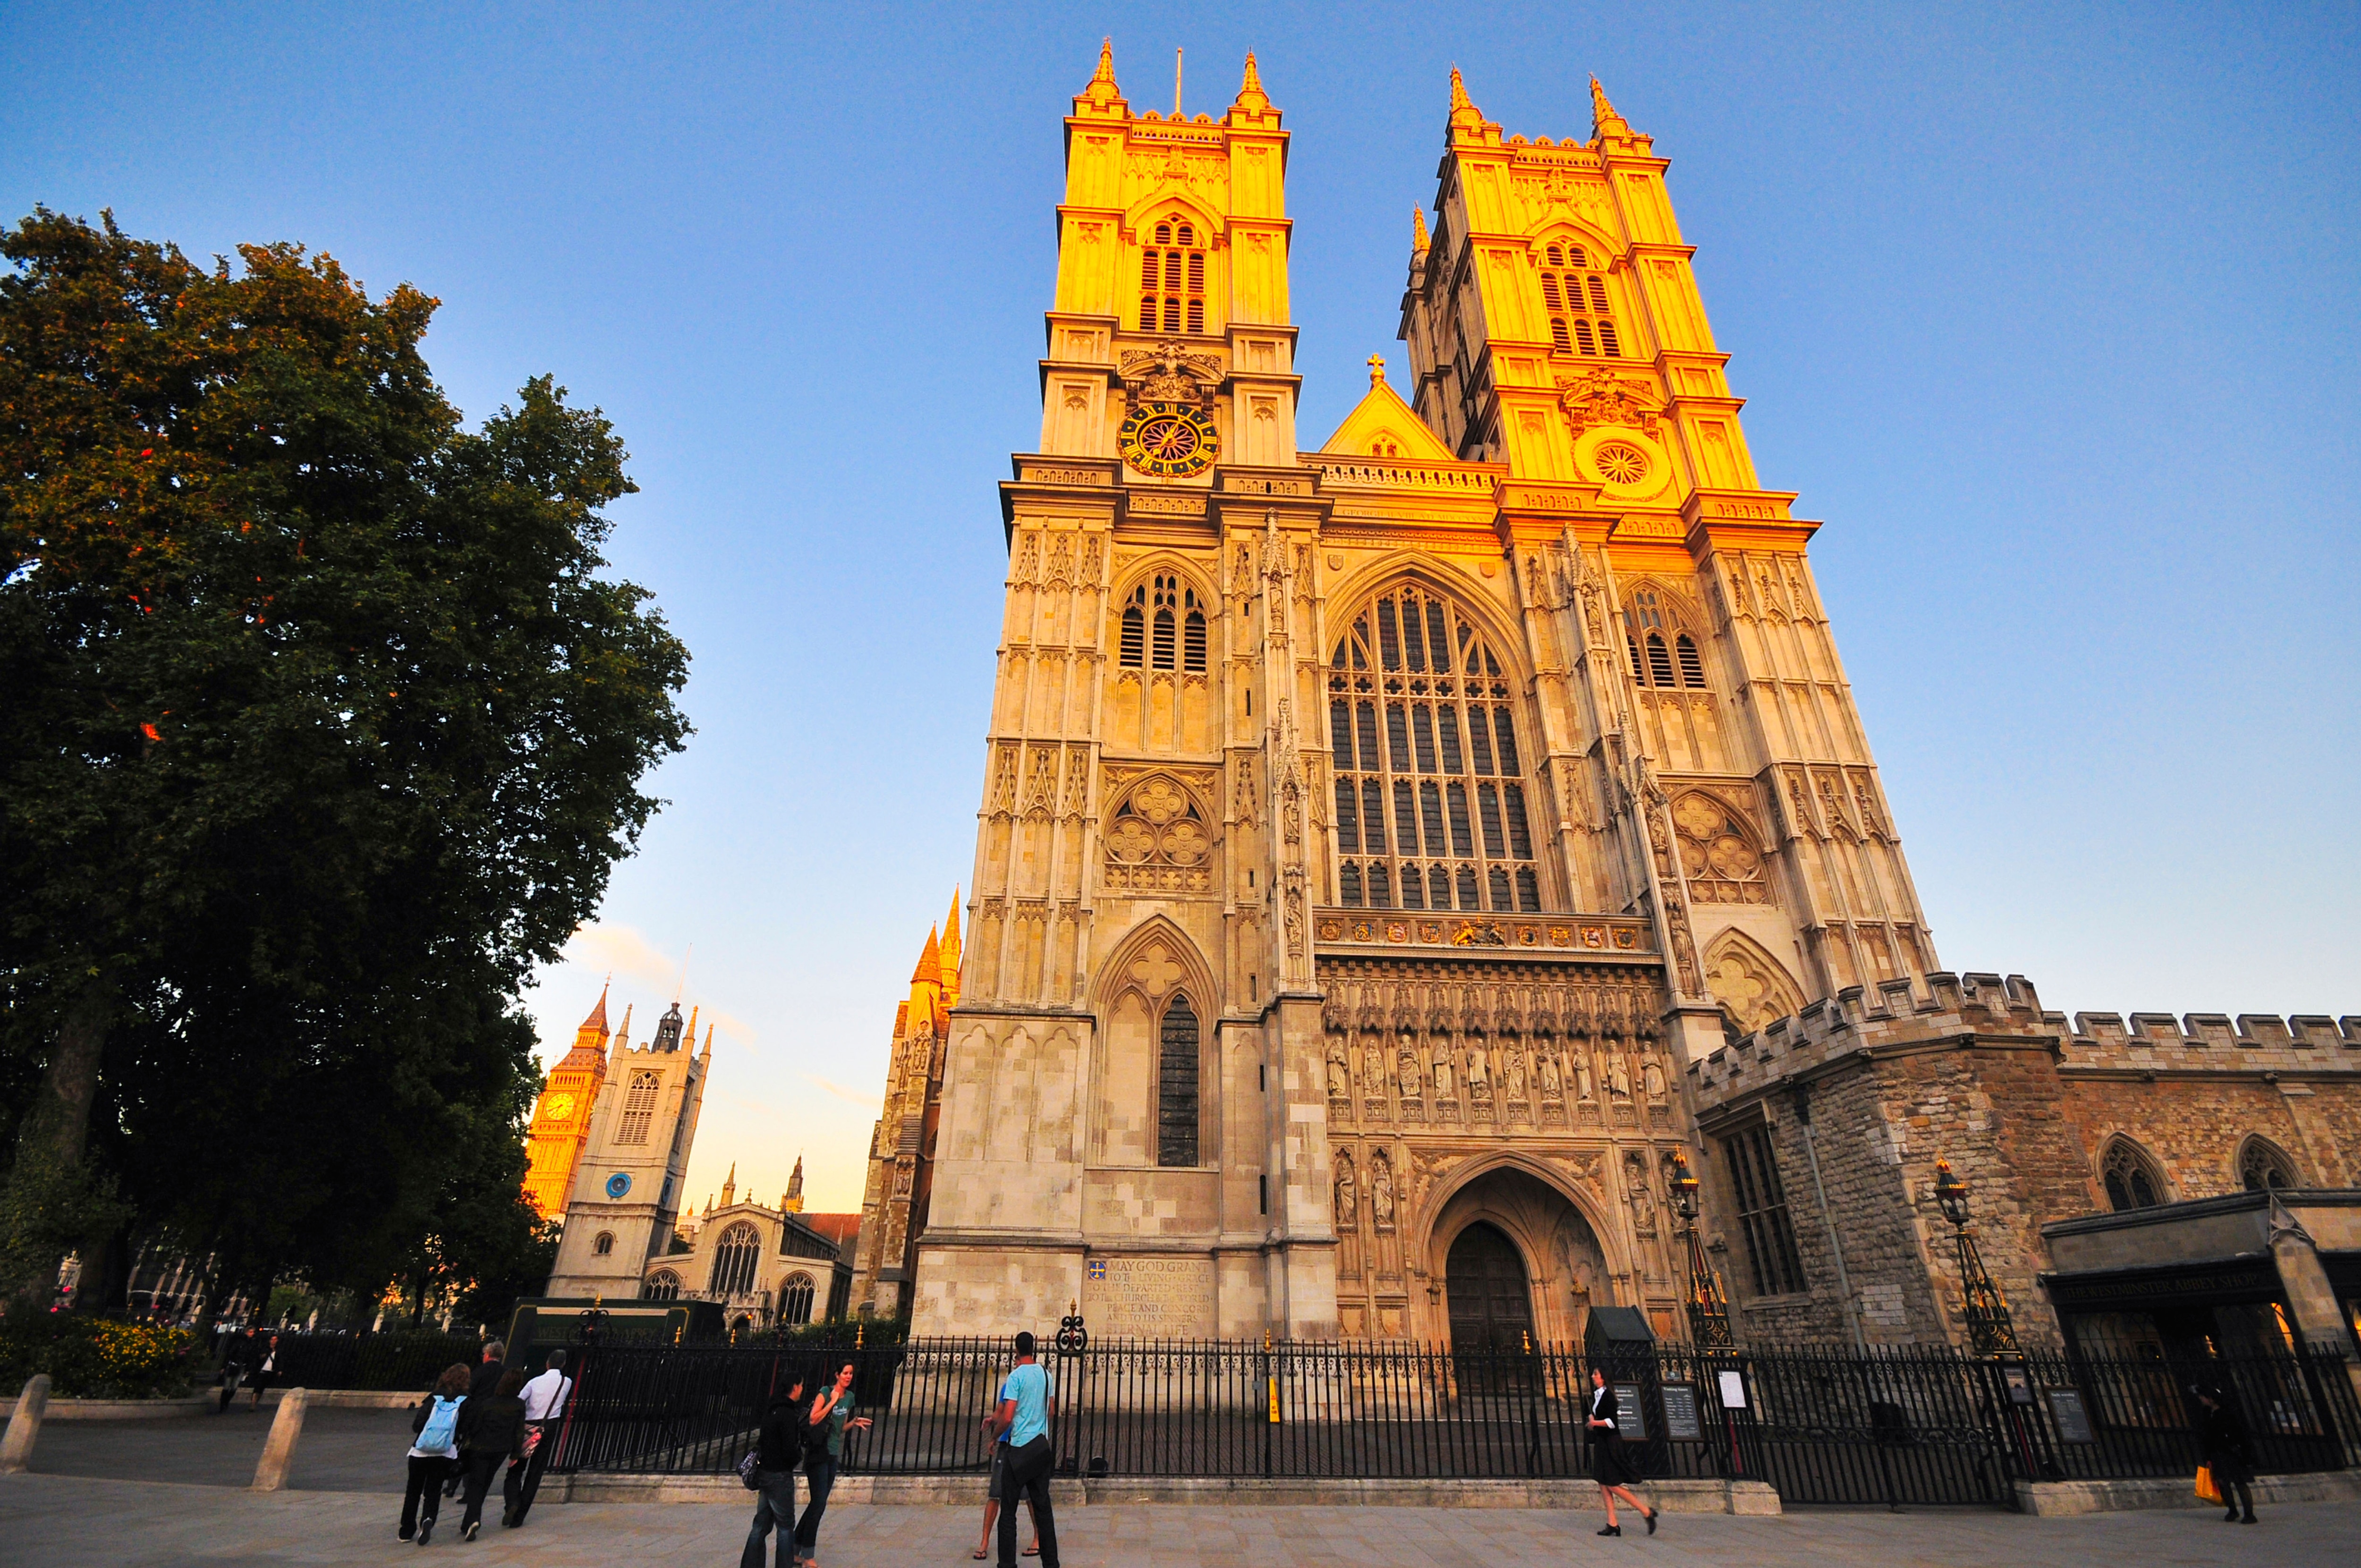 westminster abbey tourism